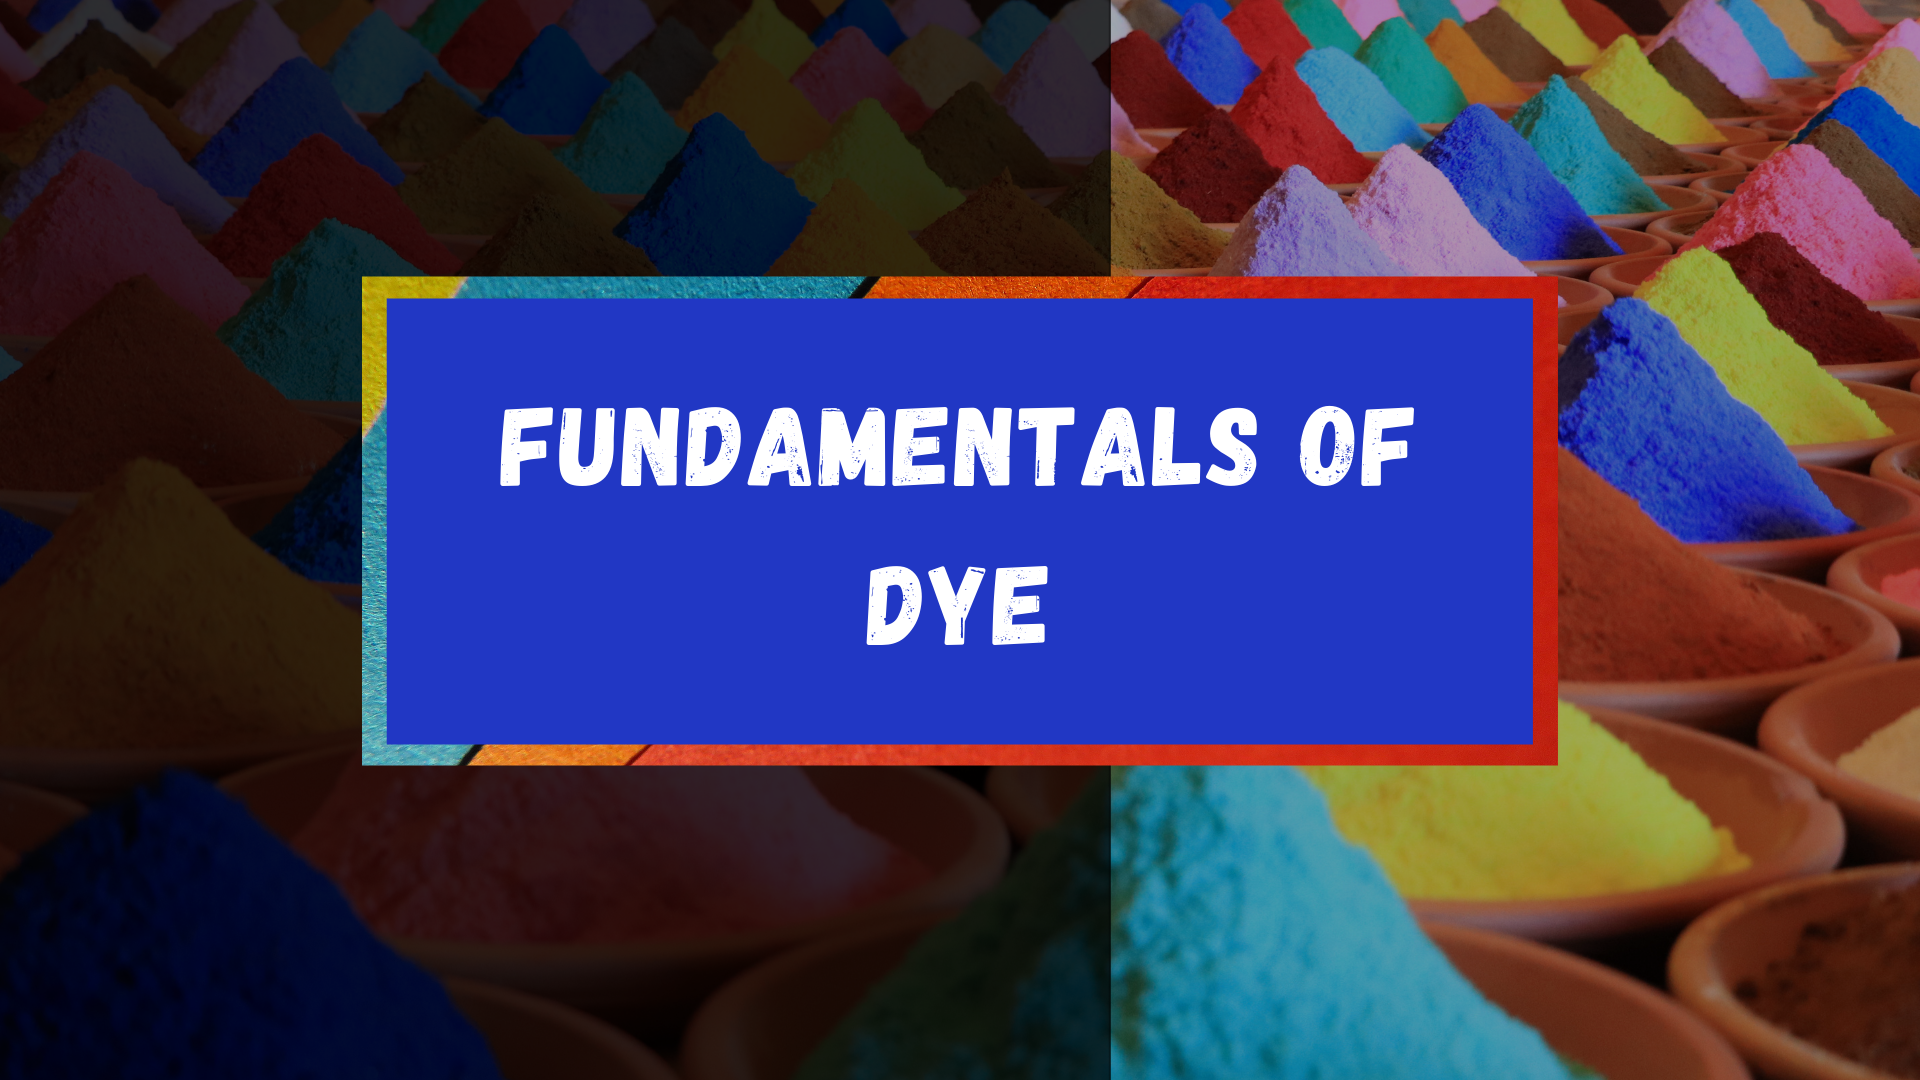 Fundamentals of Dye course image